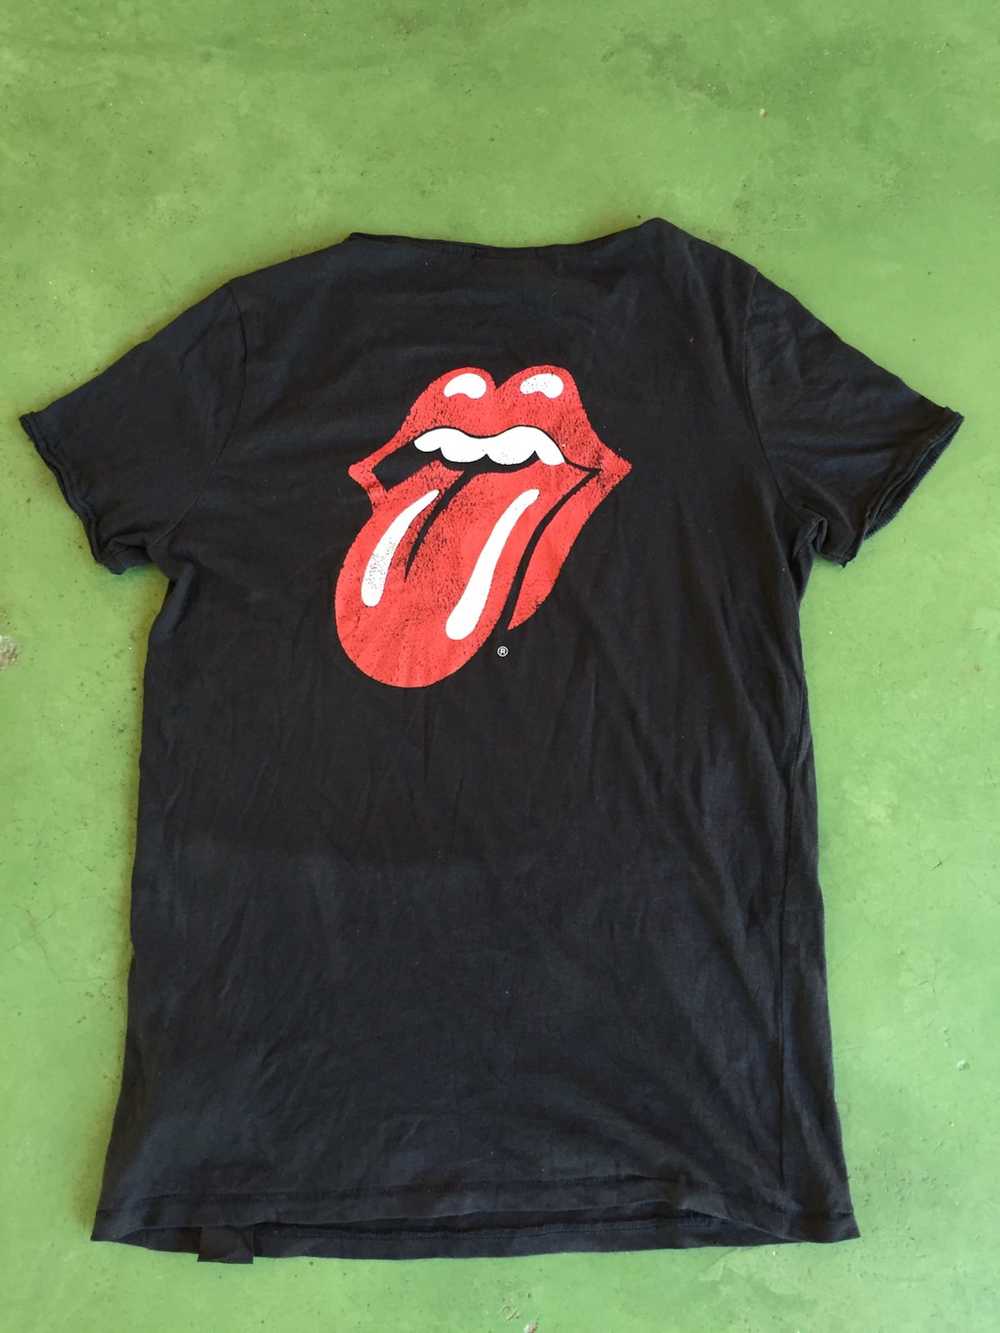 Band Tees H&M x The Rolling Stones tee - image 2